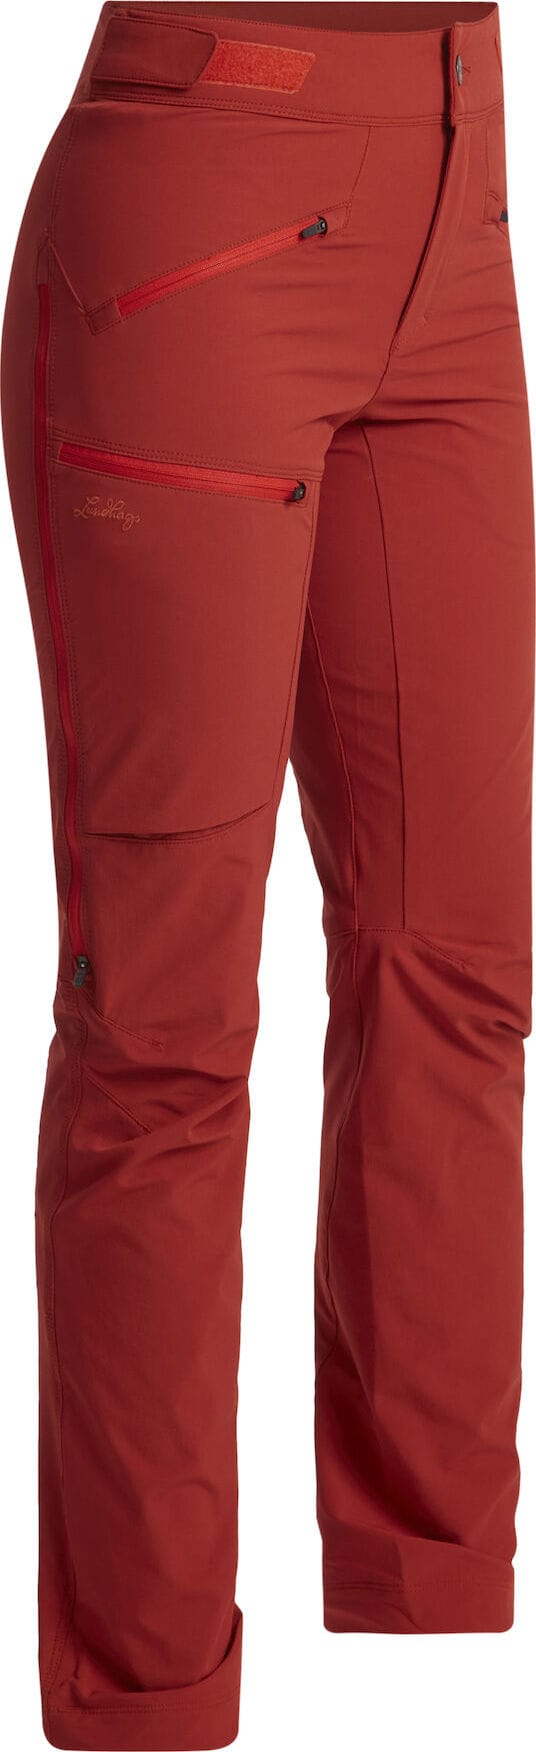 Women's Askro Pant Mellow Red Lundhags